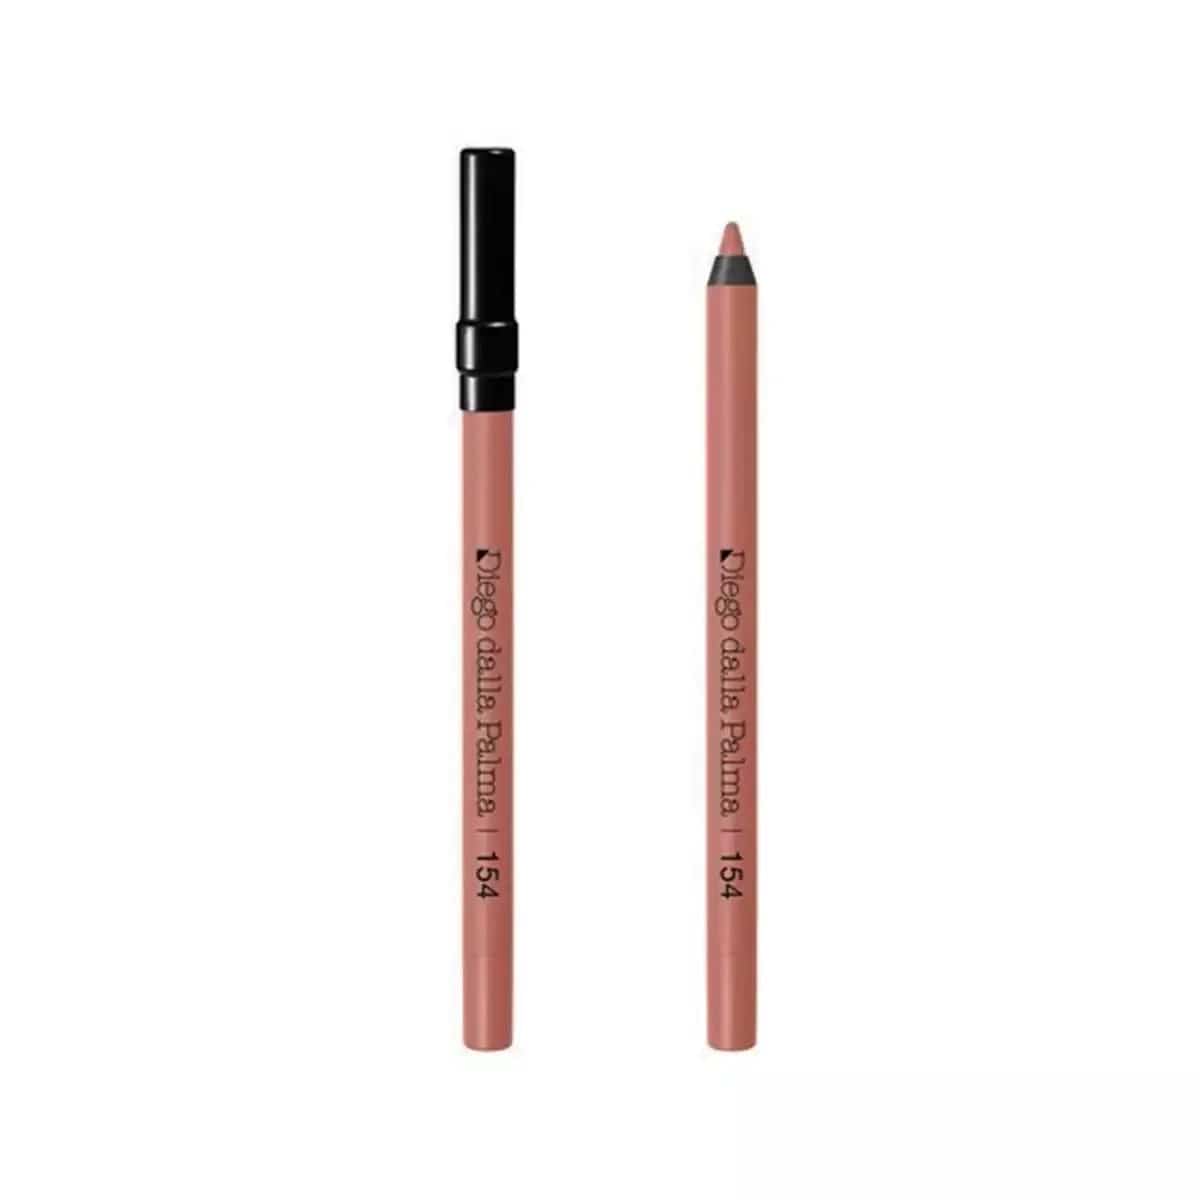 Diego Dalla Palma Stay On Me Lip Liner 12 g / 154-Nude Beige